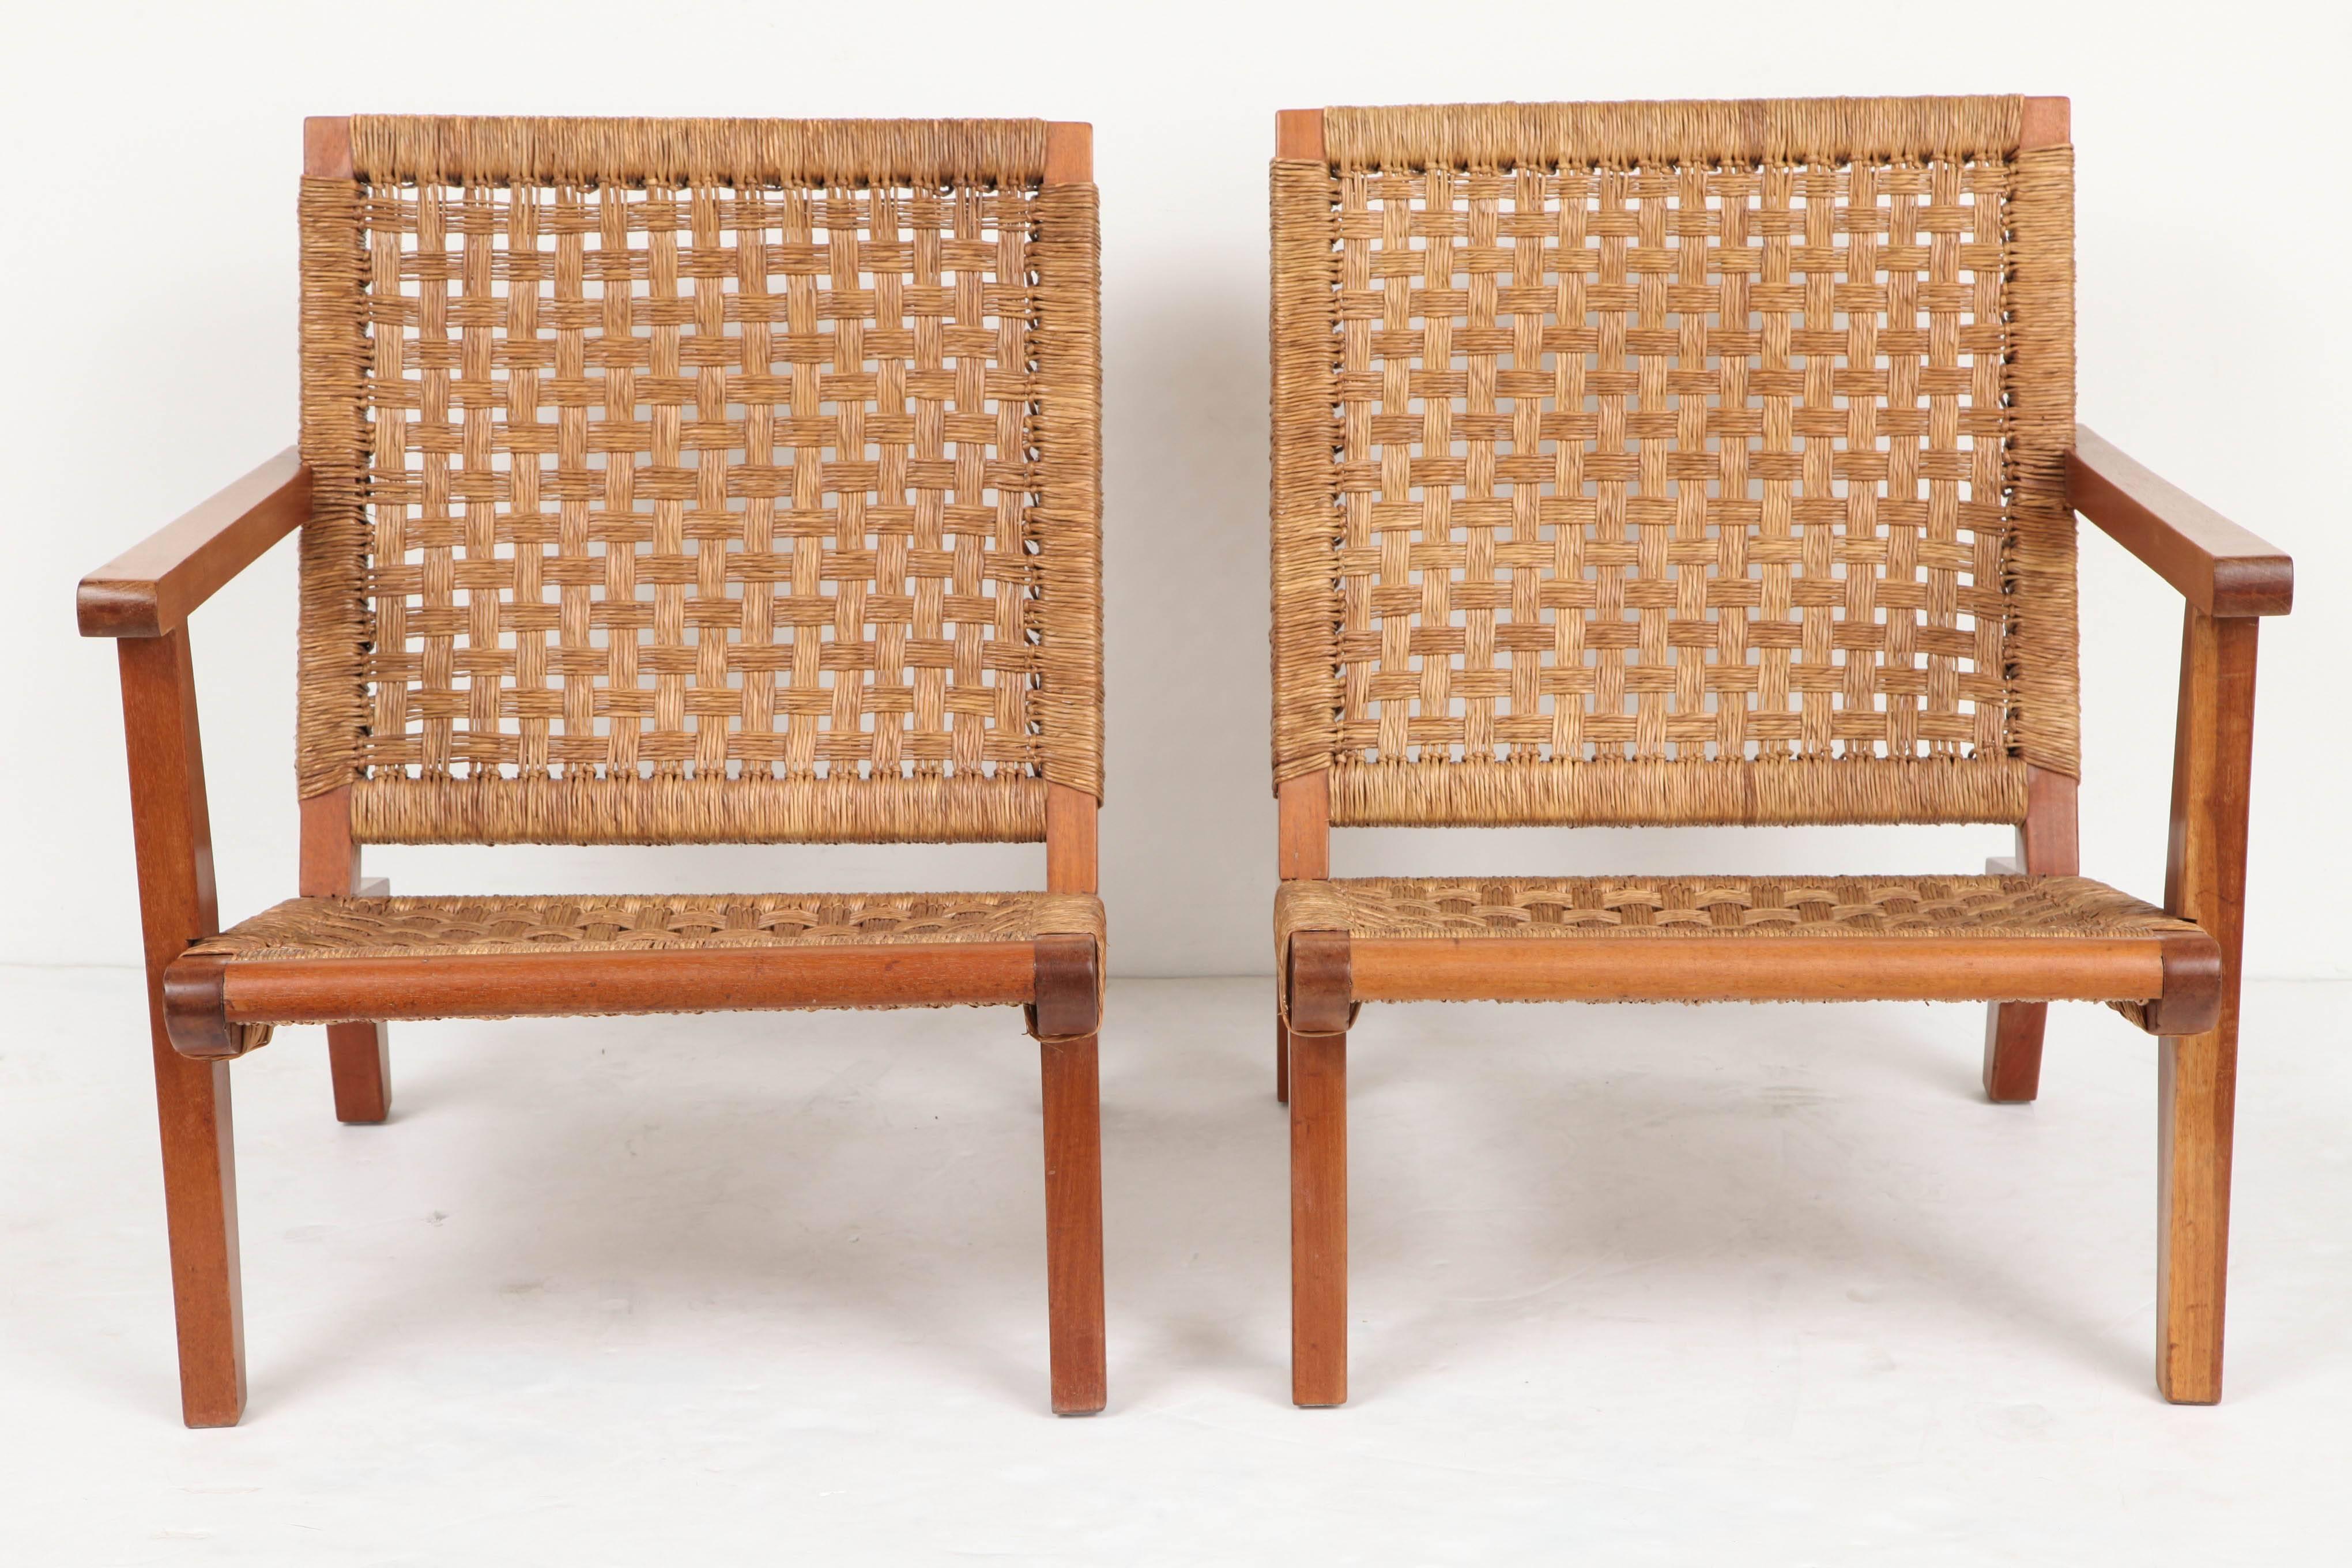 Hand-Woven Clara Porset Walnut and Woven Rush Divided Settee For Sale